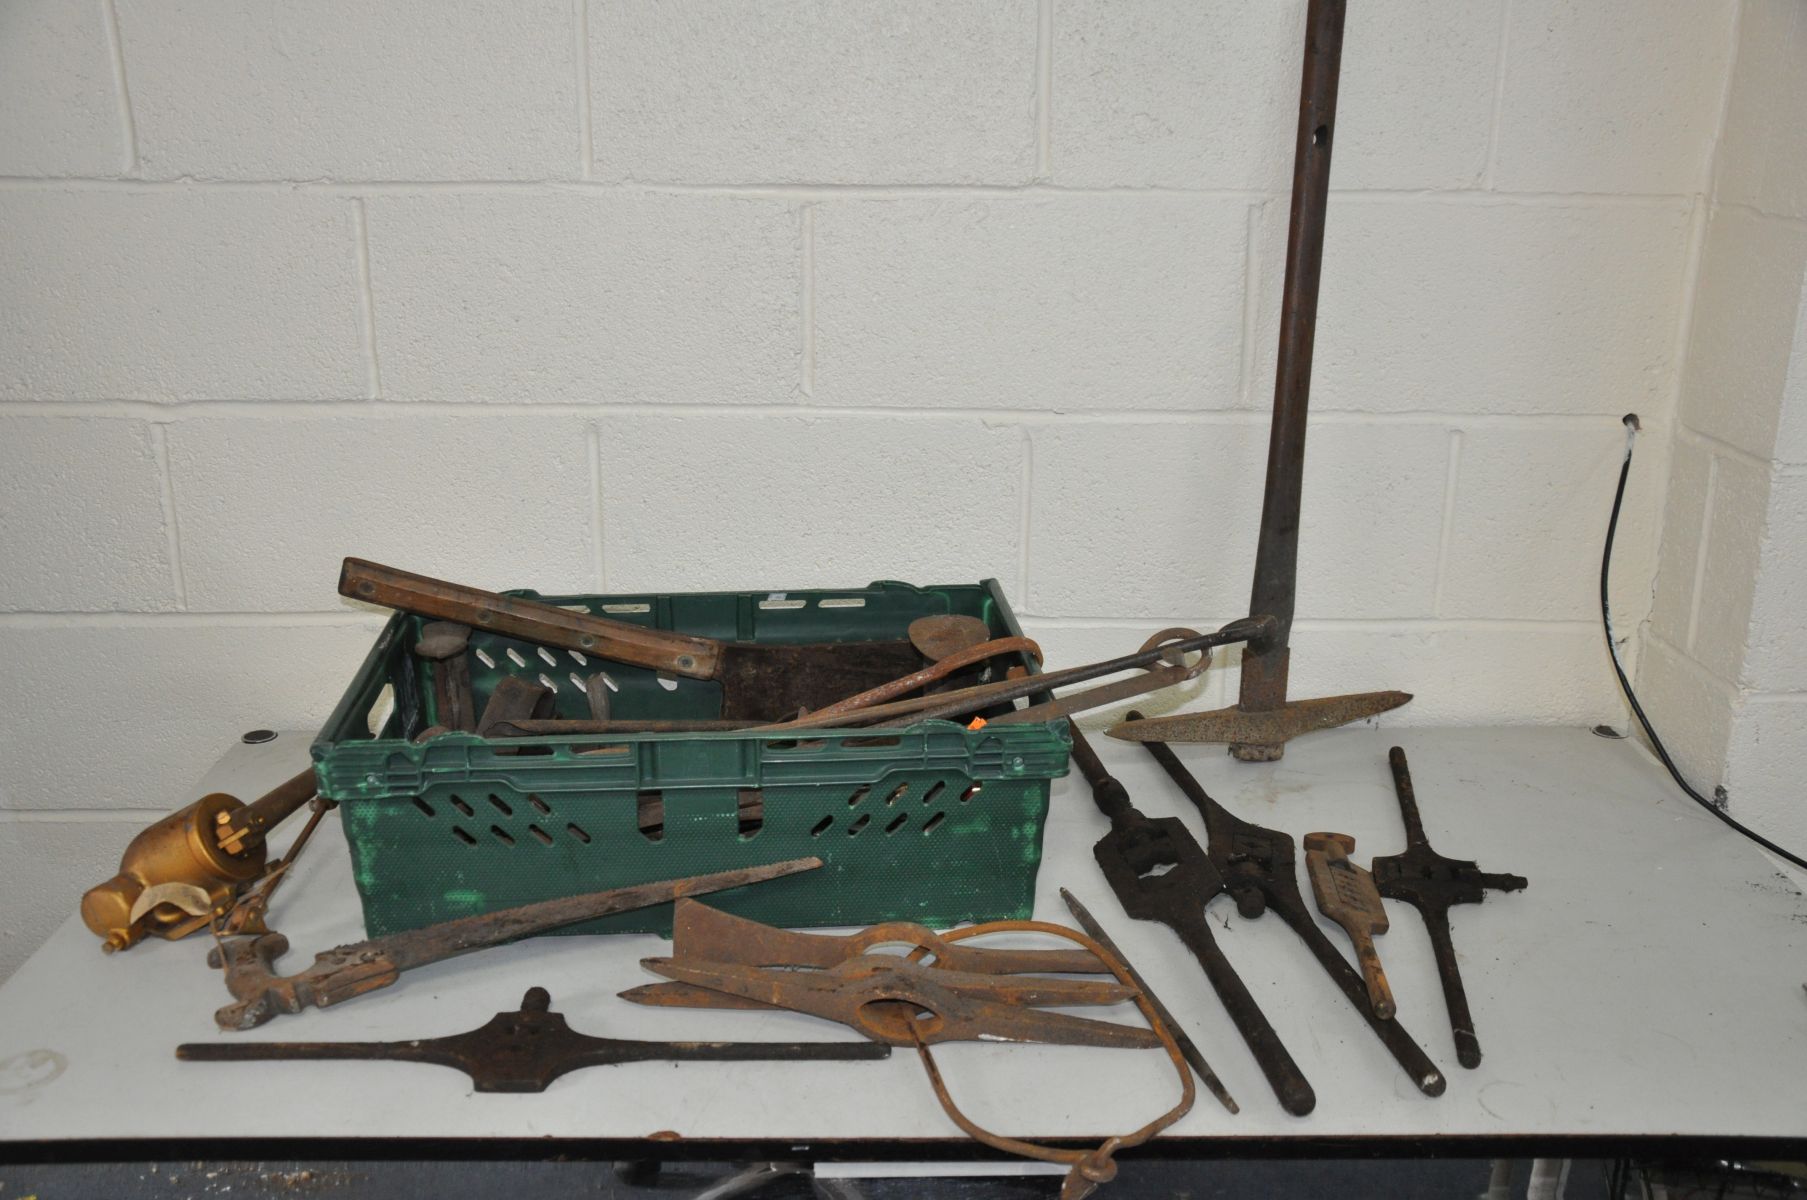 A TRAY CONTAINING VINTAGE TOOLS, door furniture, and fire furniture, including tap wrenches, show